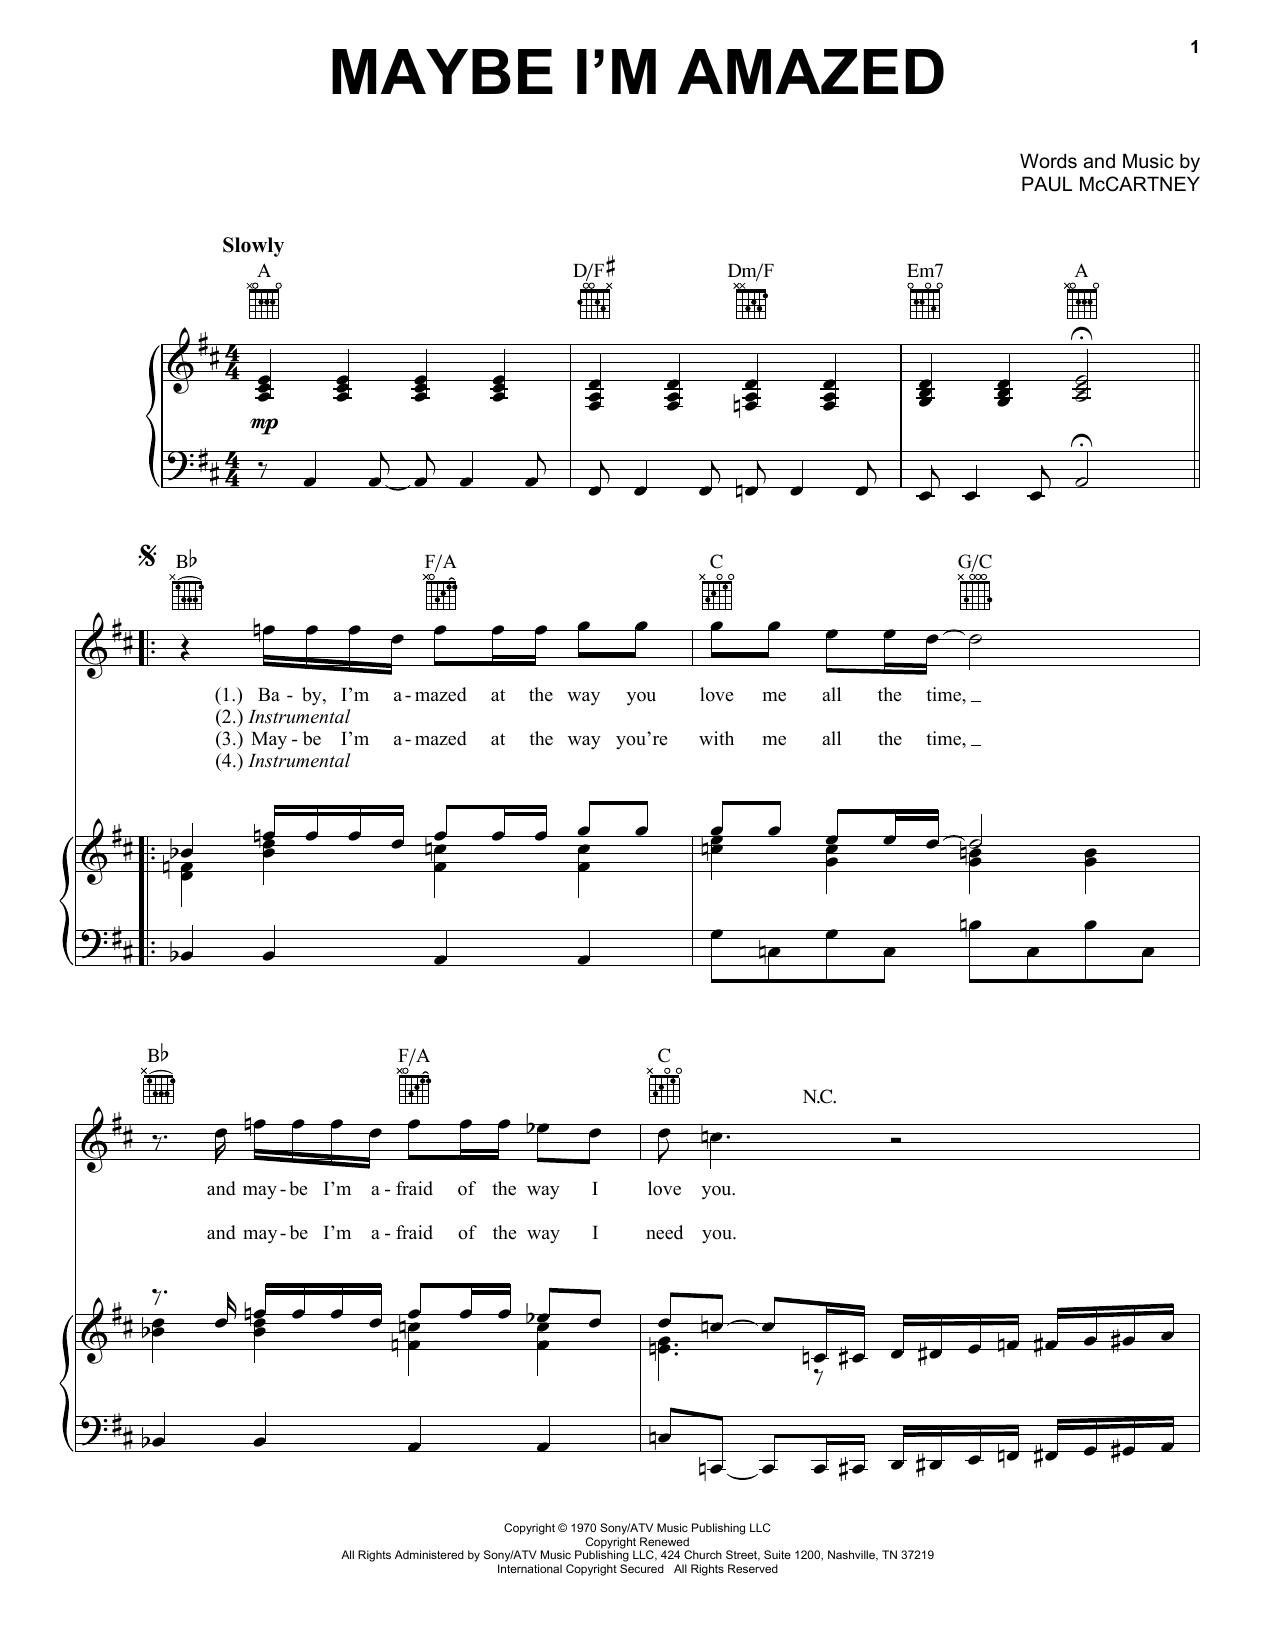 Paul McCartney Maybe I'm Amazed sheet music notes and chords. Download Printable PDF.